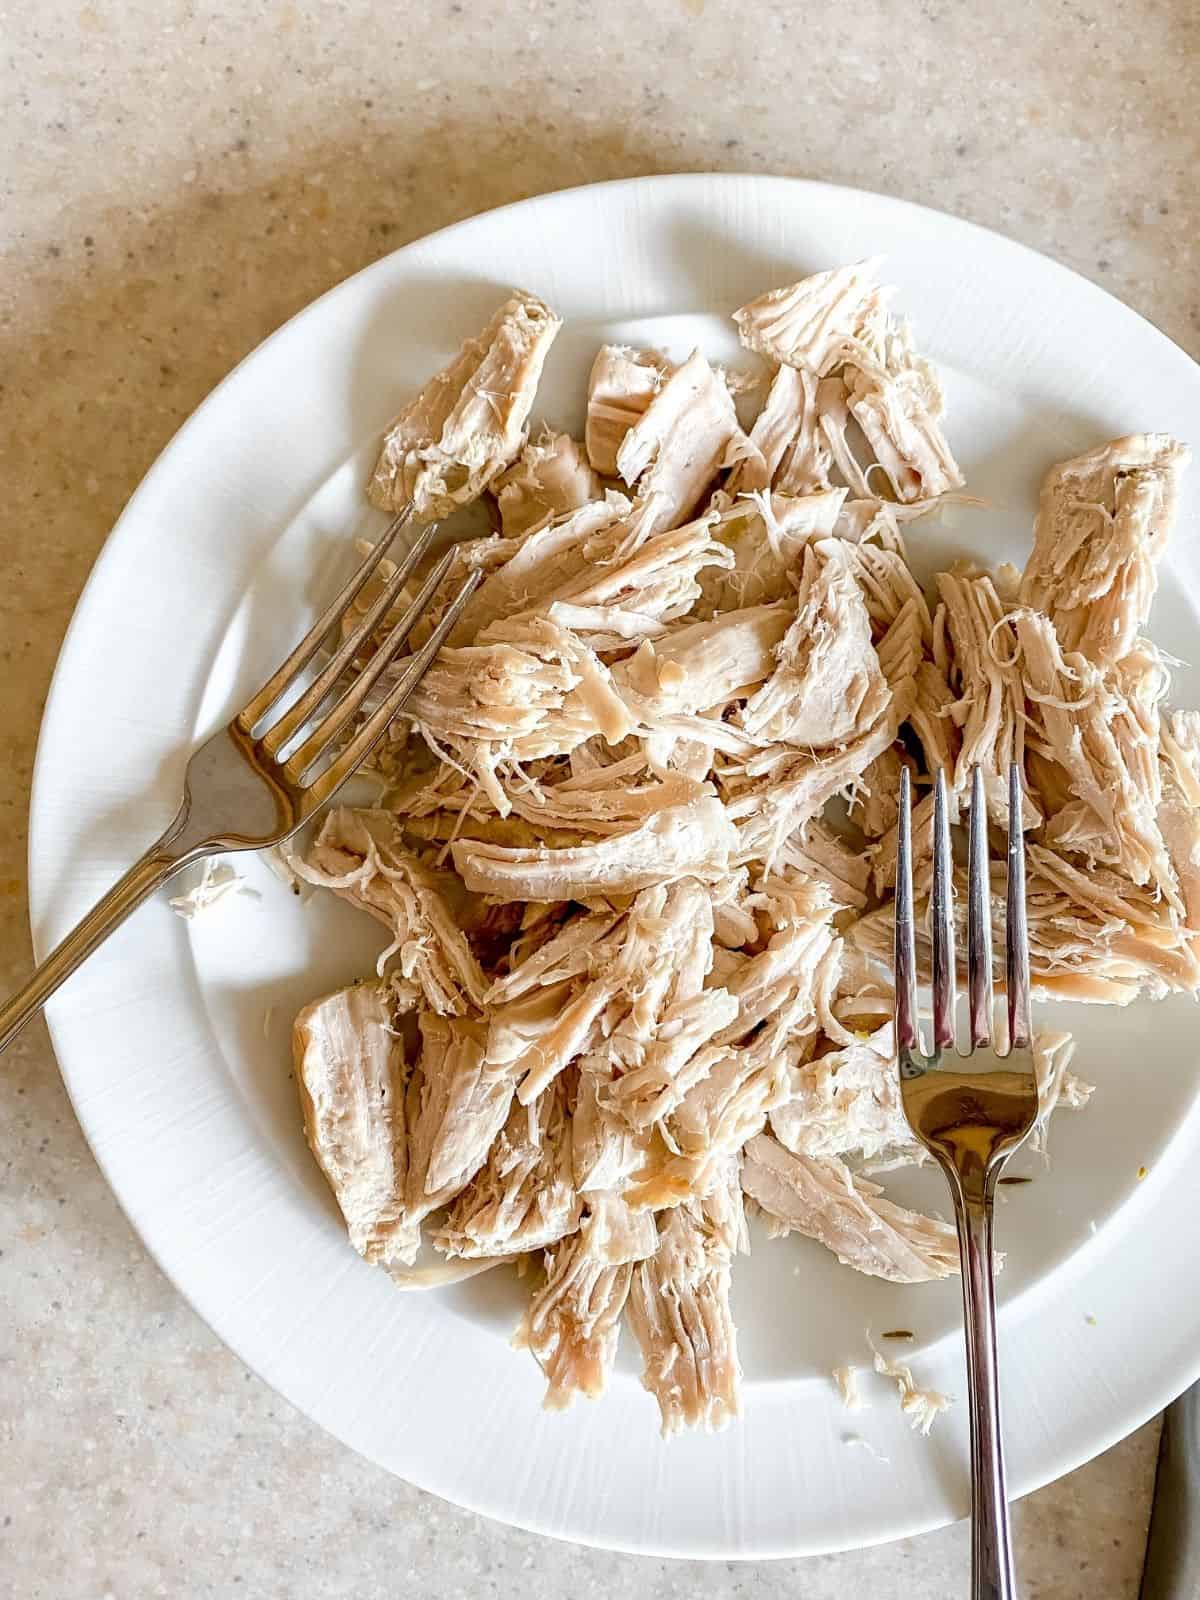 shredded turkey on a white plate with two forks on it.